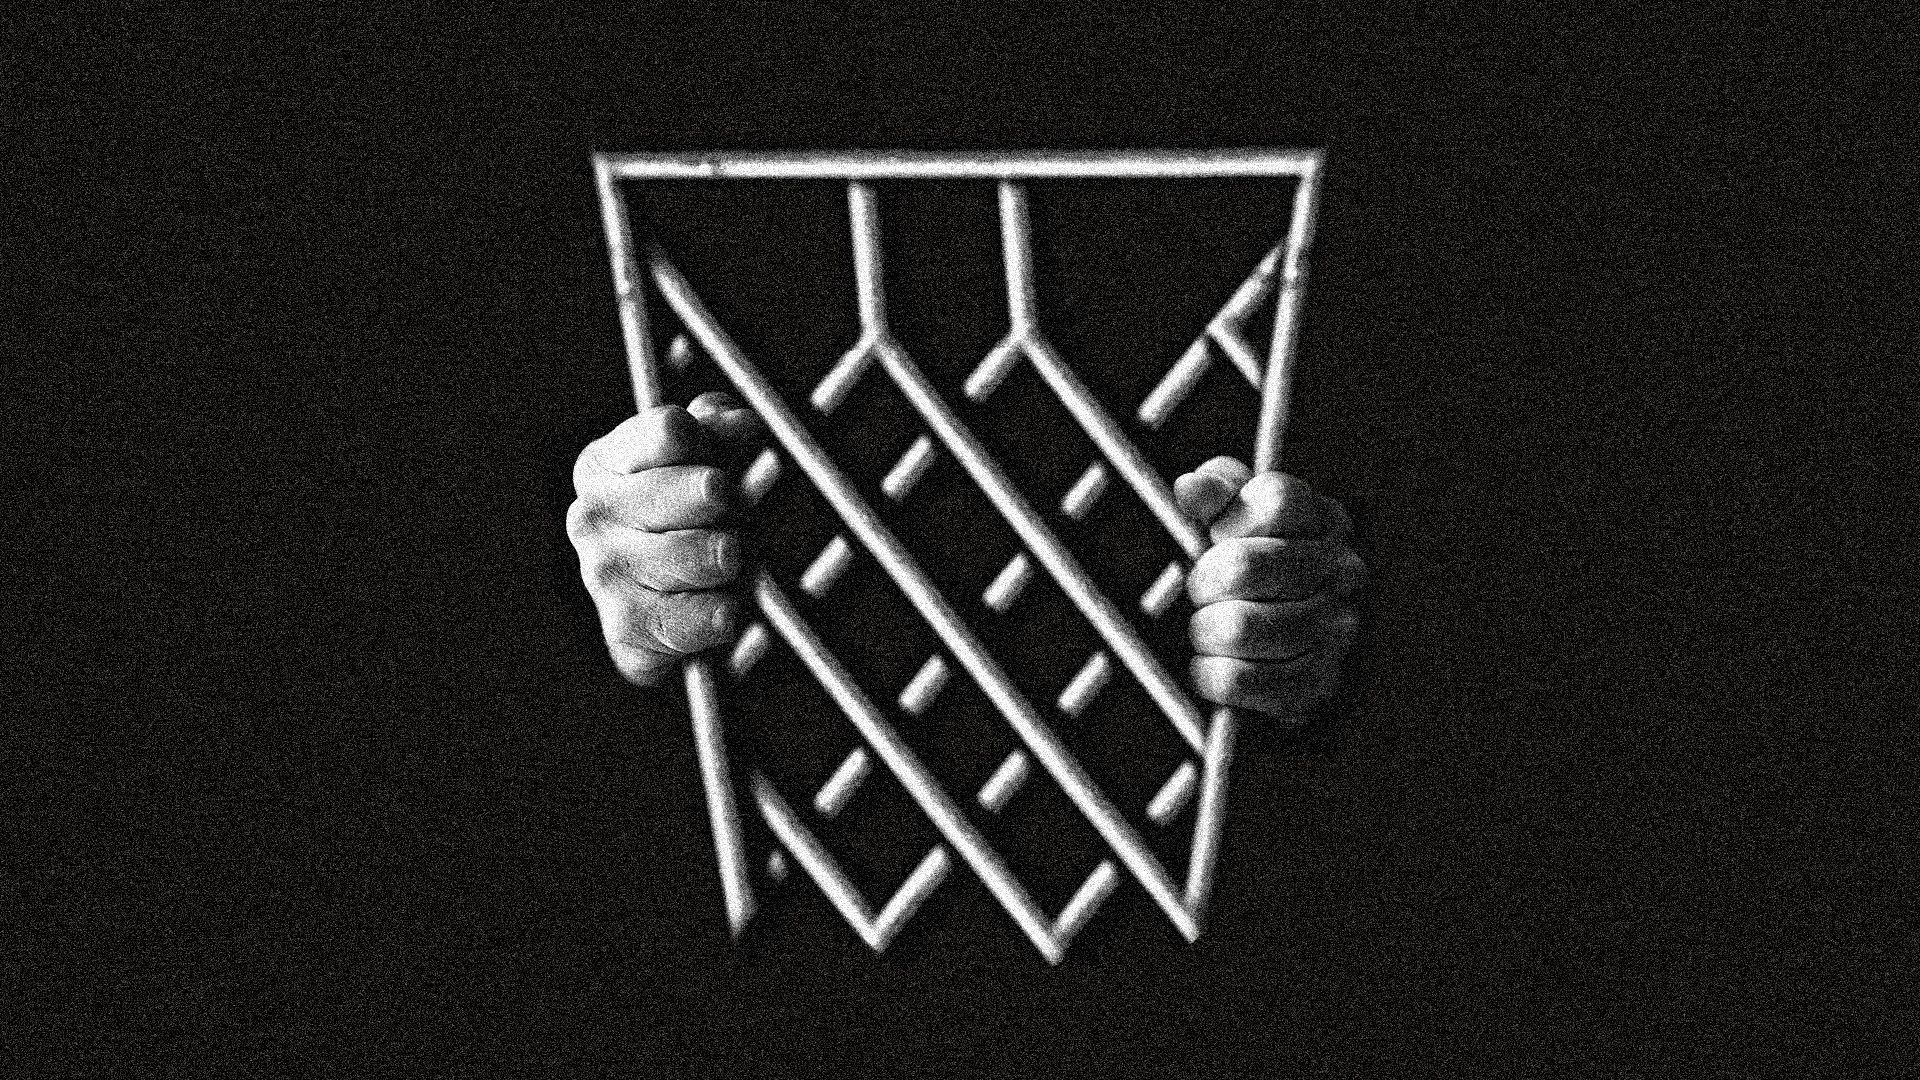 Illustration of a basketball net made out of prison bars